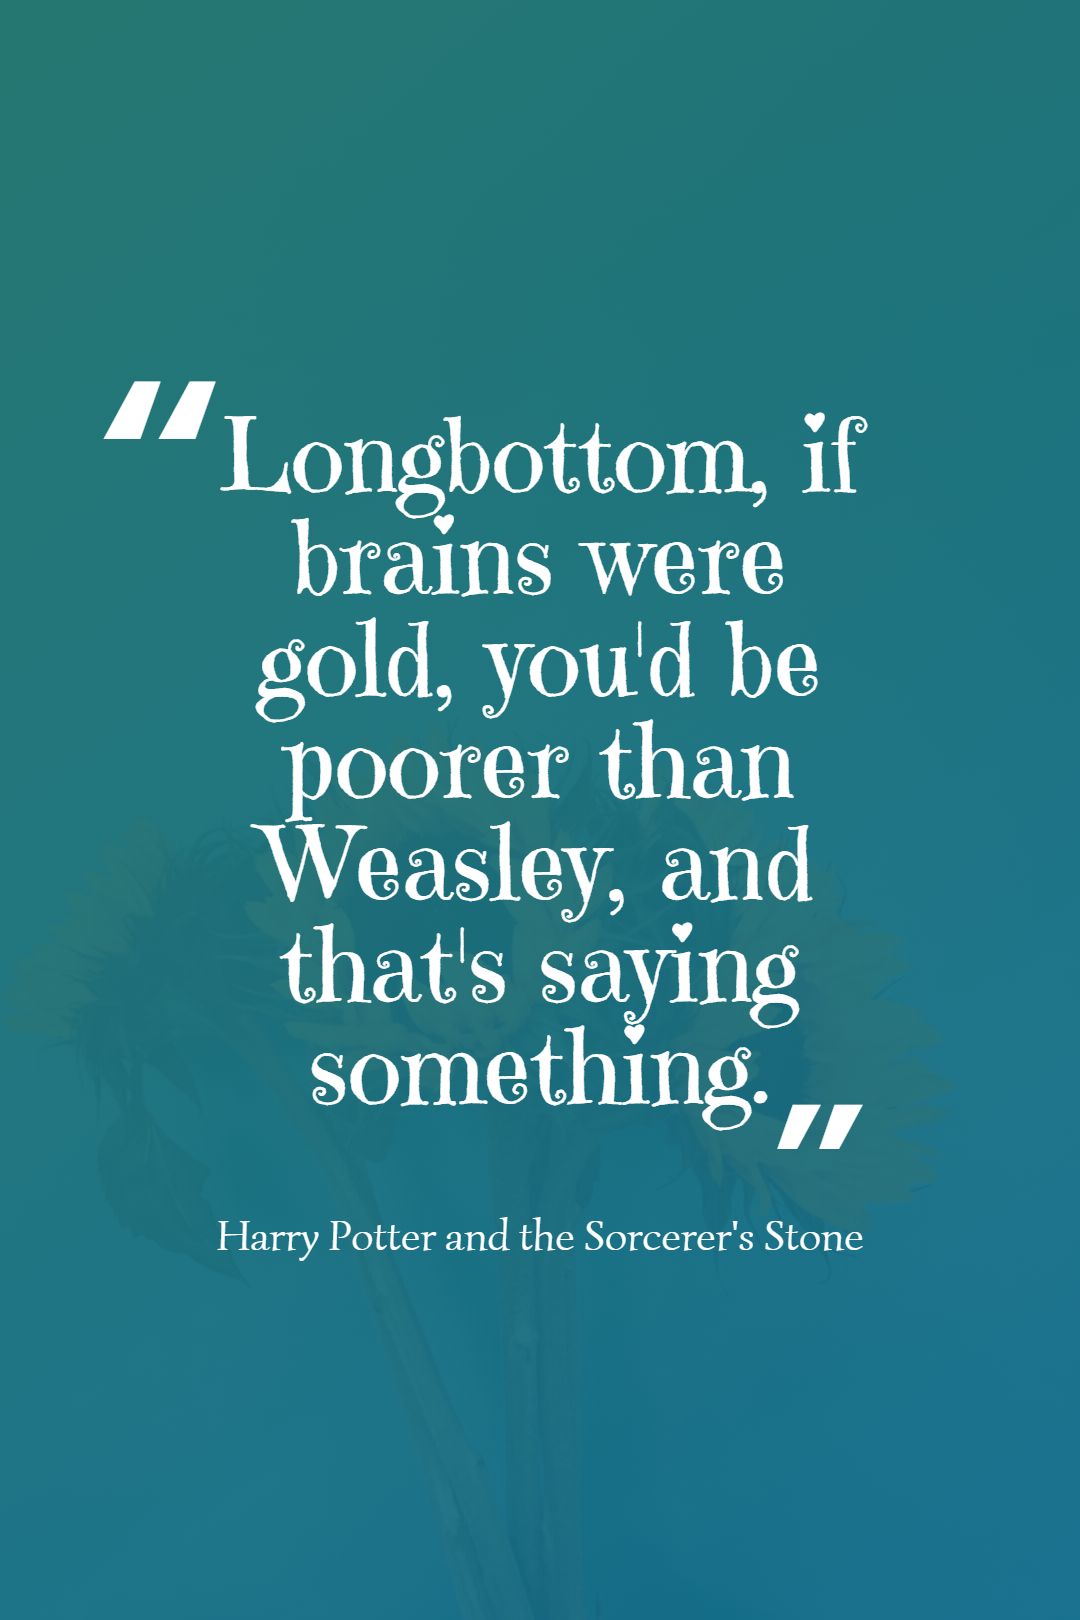 Longbottom if brains were gold youd be poorer than Weasley and thats saying something.